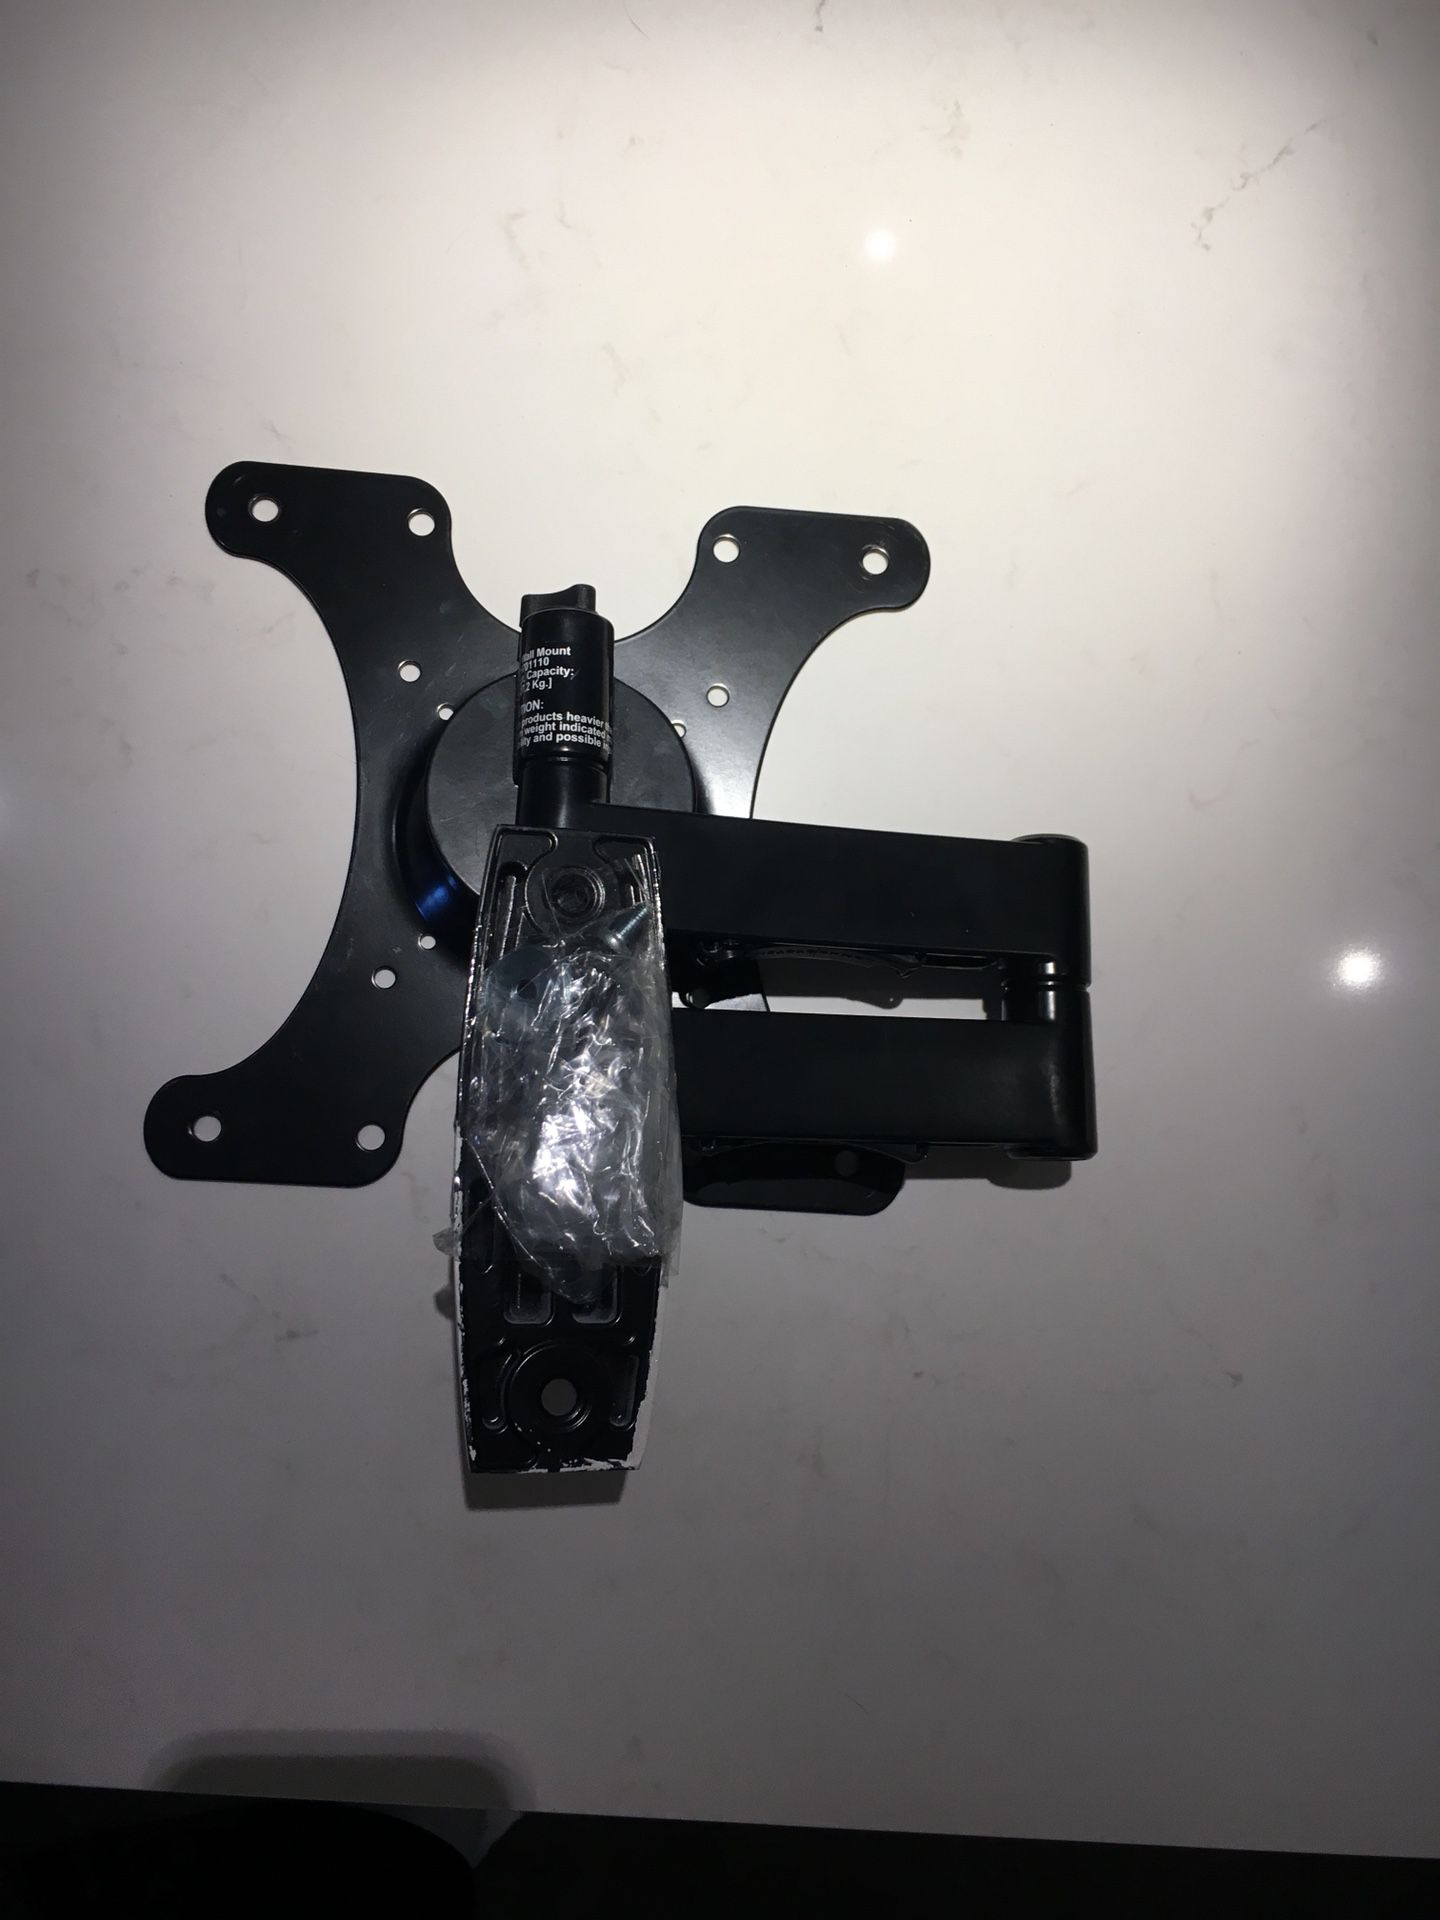 TV bracket extendable arm used for 32” Samsung